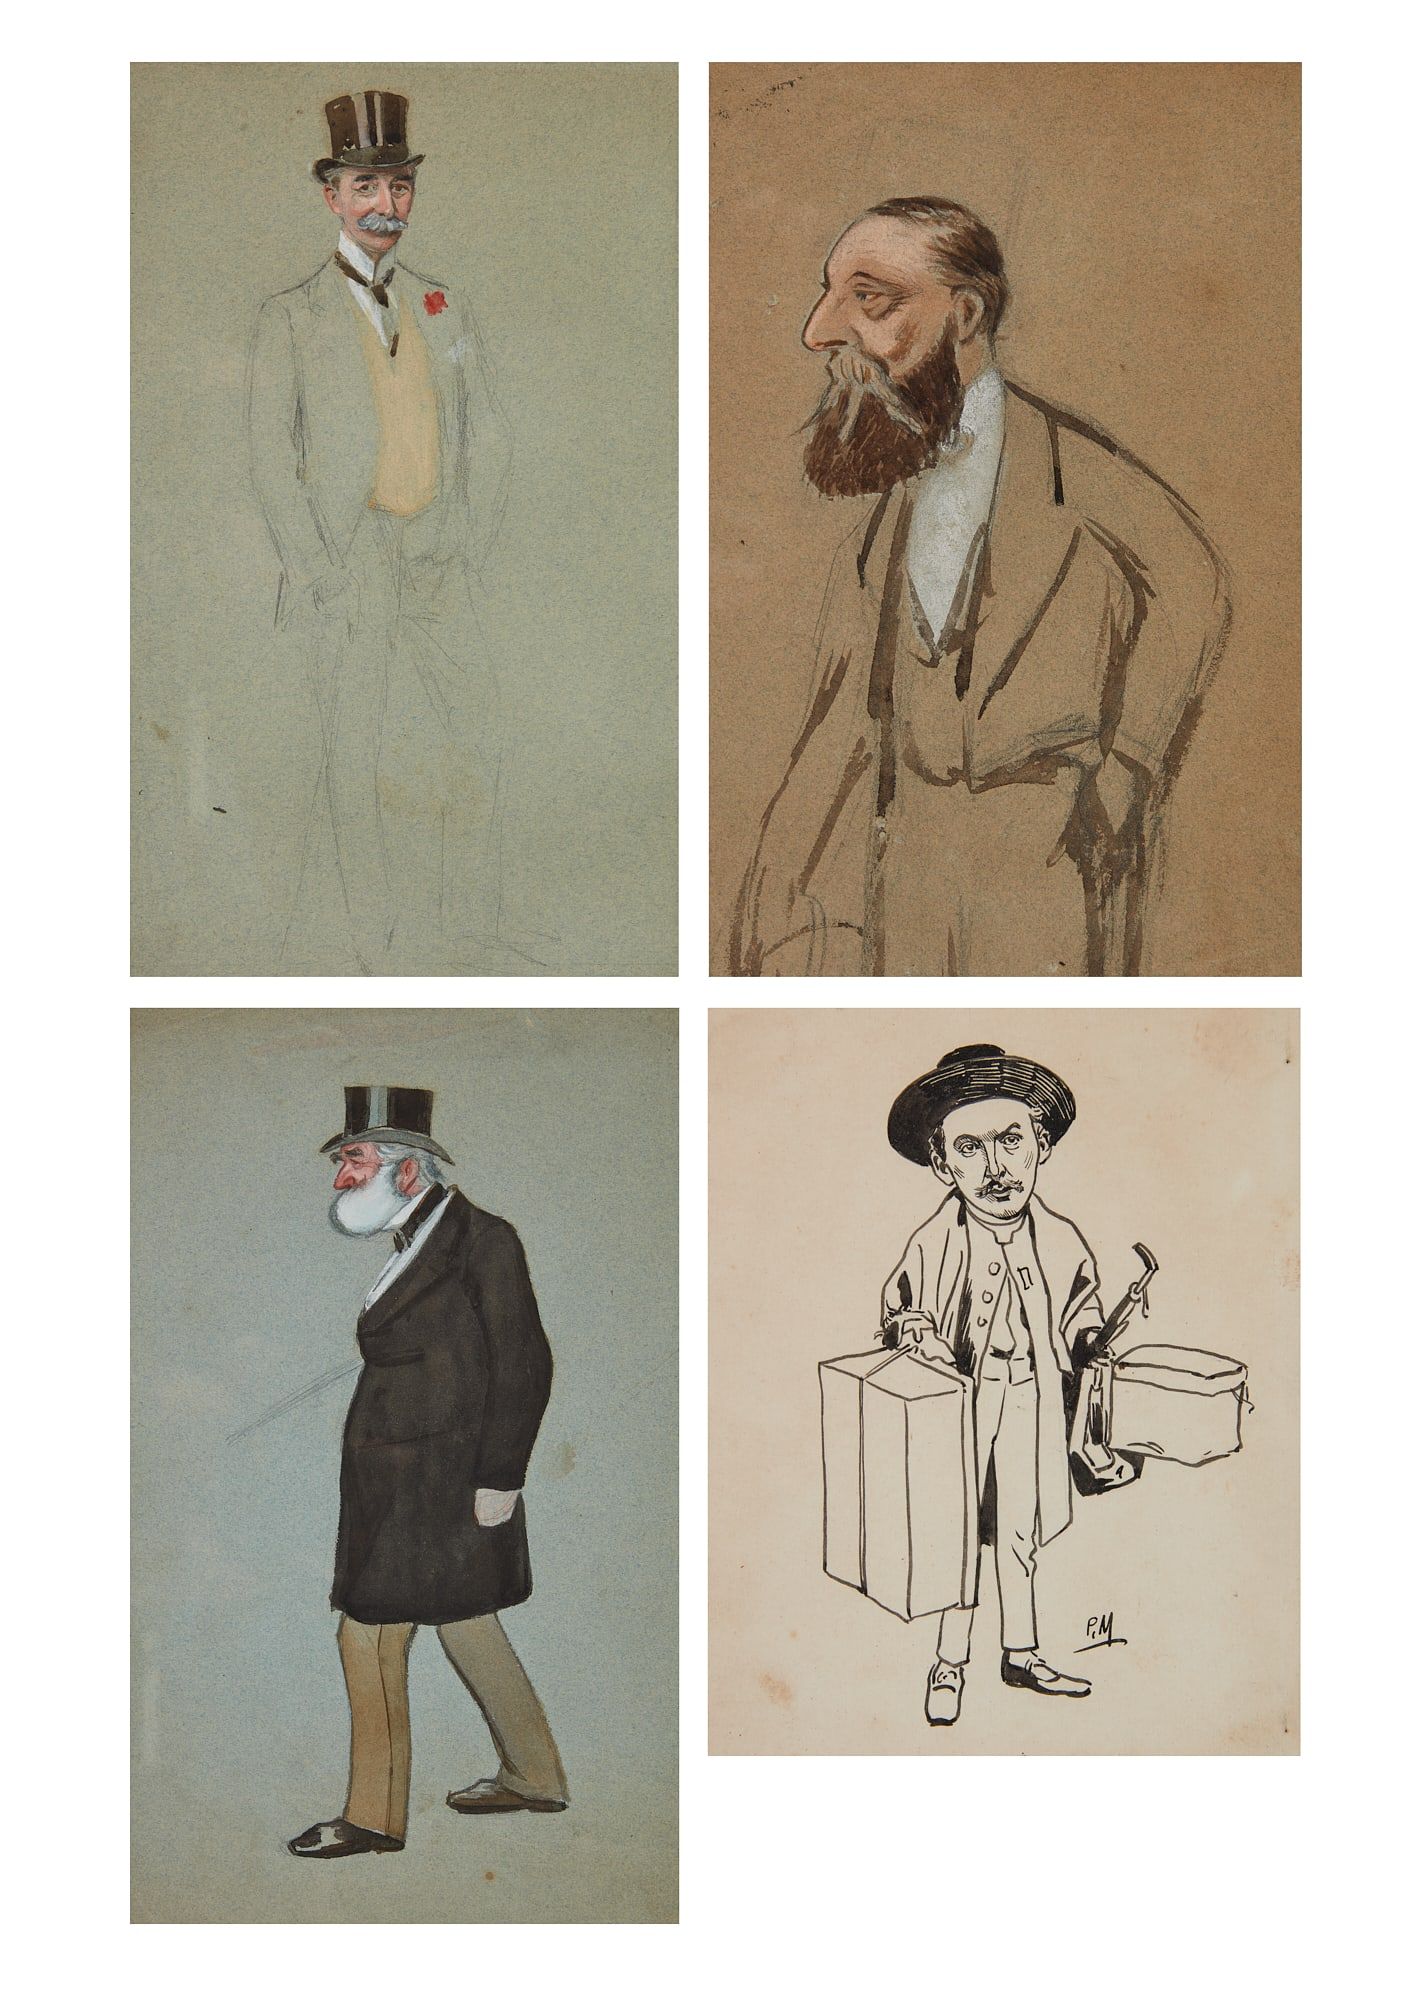 GROUP OF FOUR CARICATURE ILLUSTRATIONSGroup 2fb383b